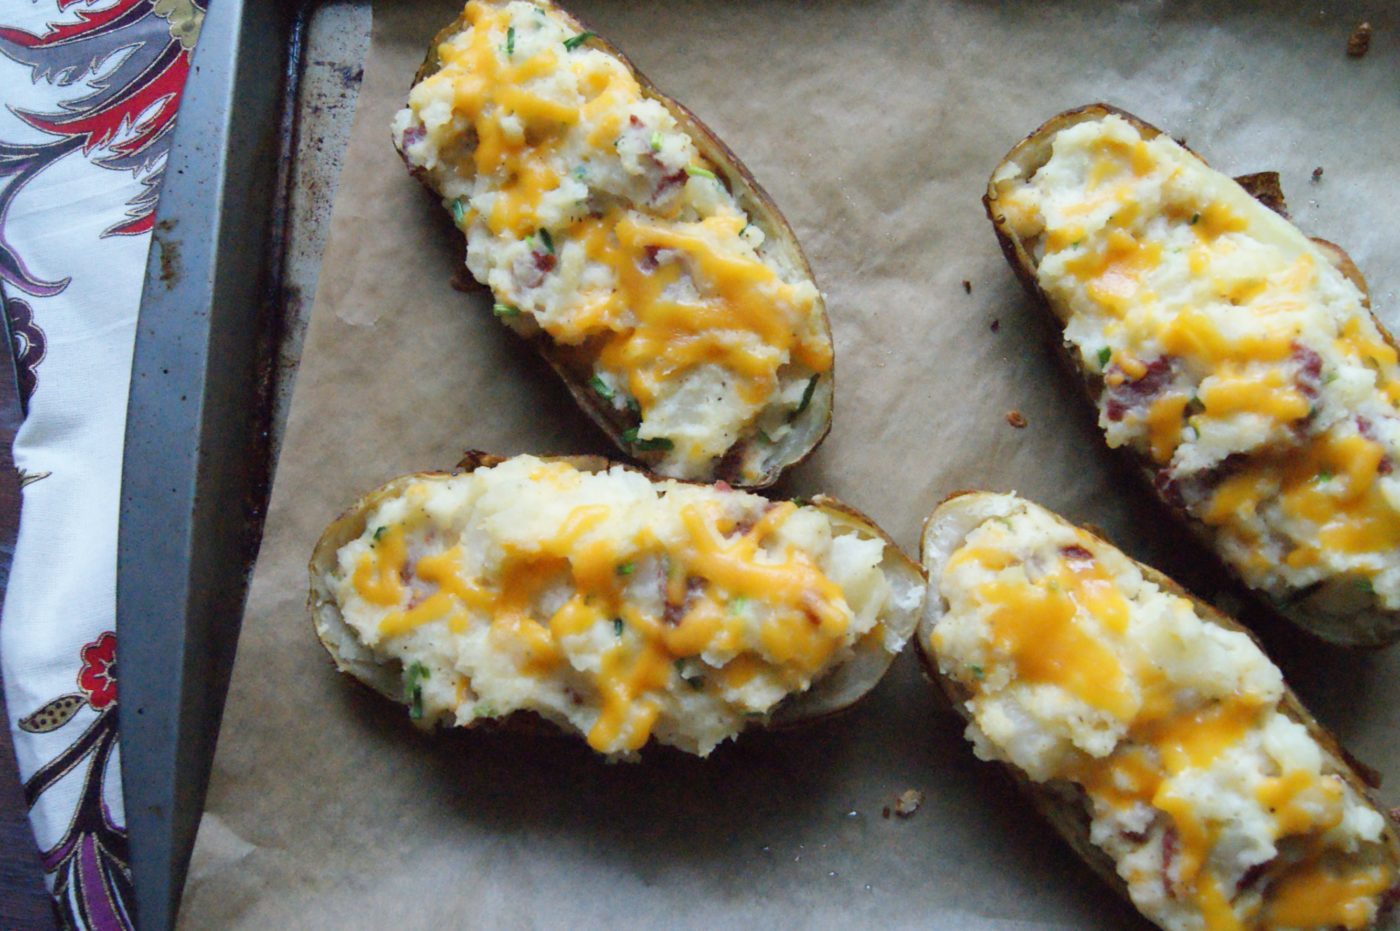 Twice baked potatoes are an easy side dish to accompany dinner.